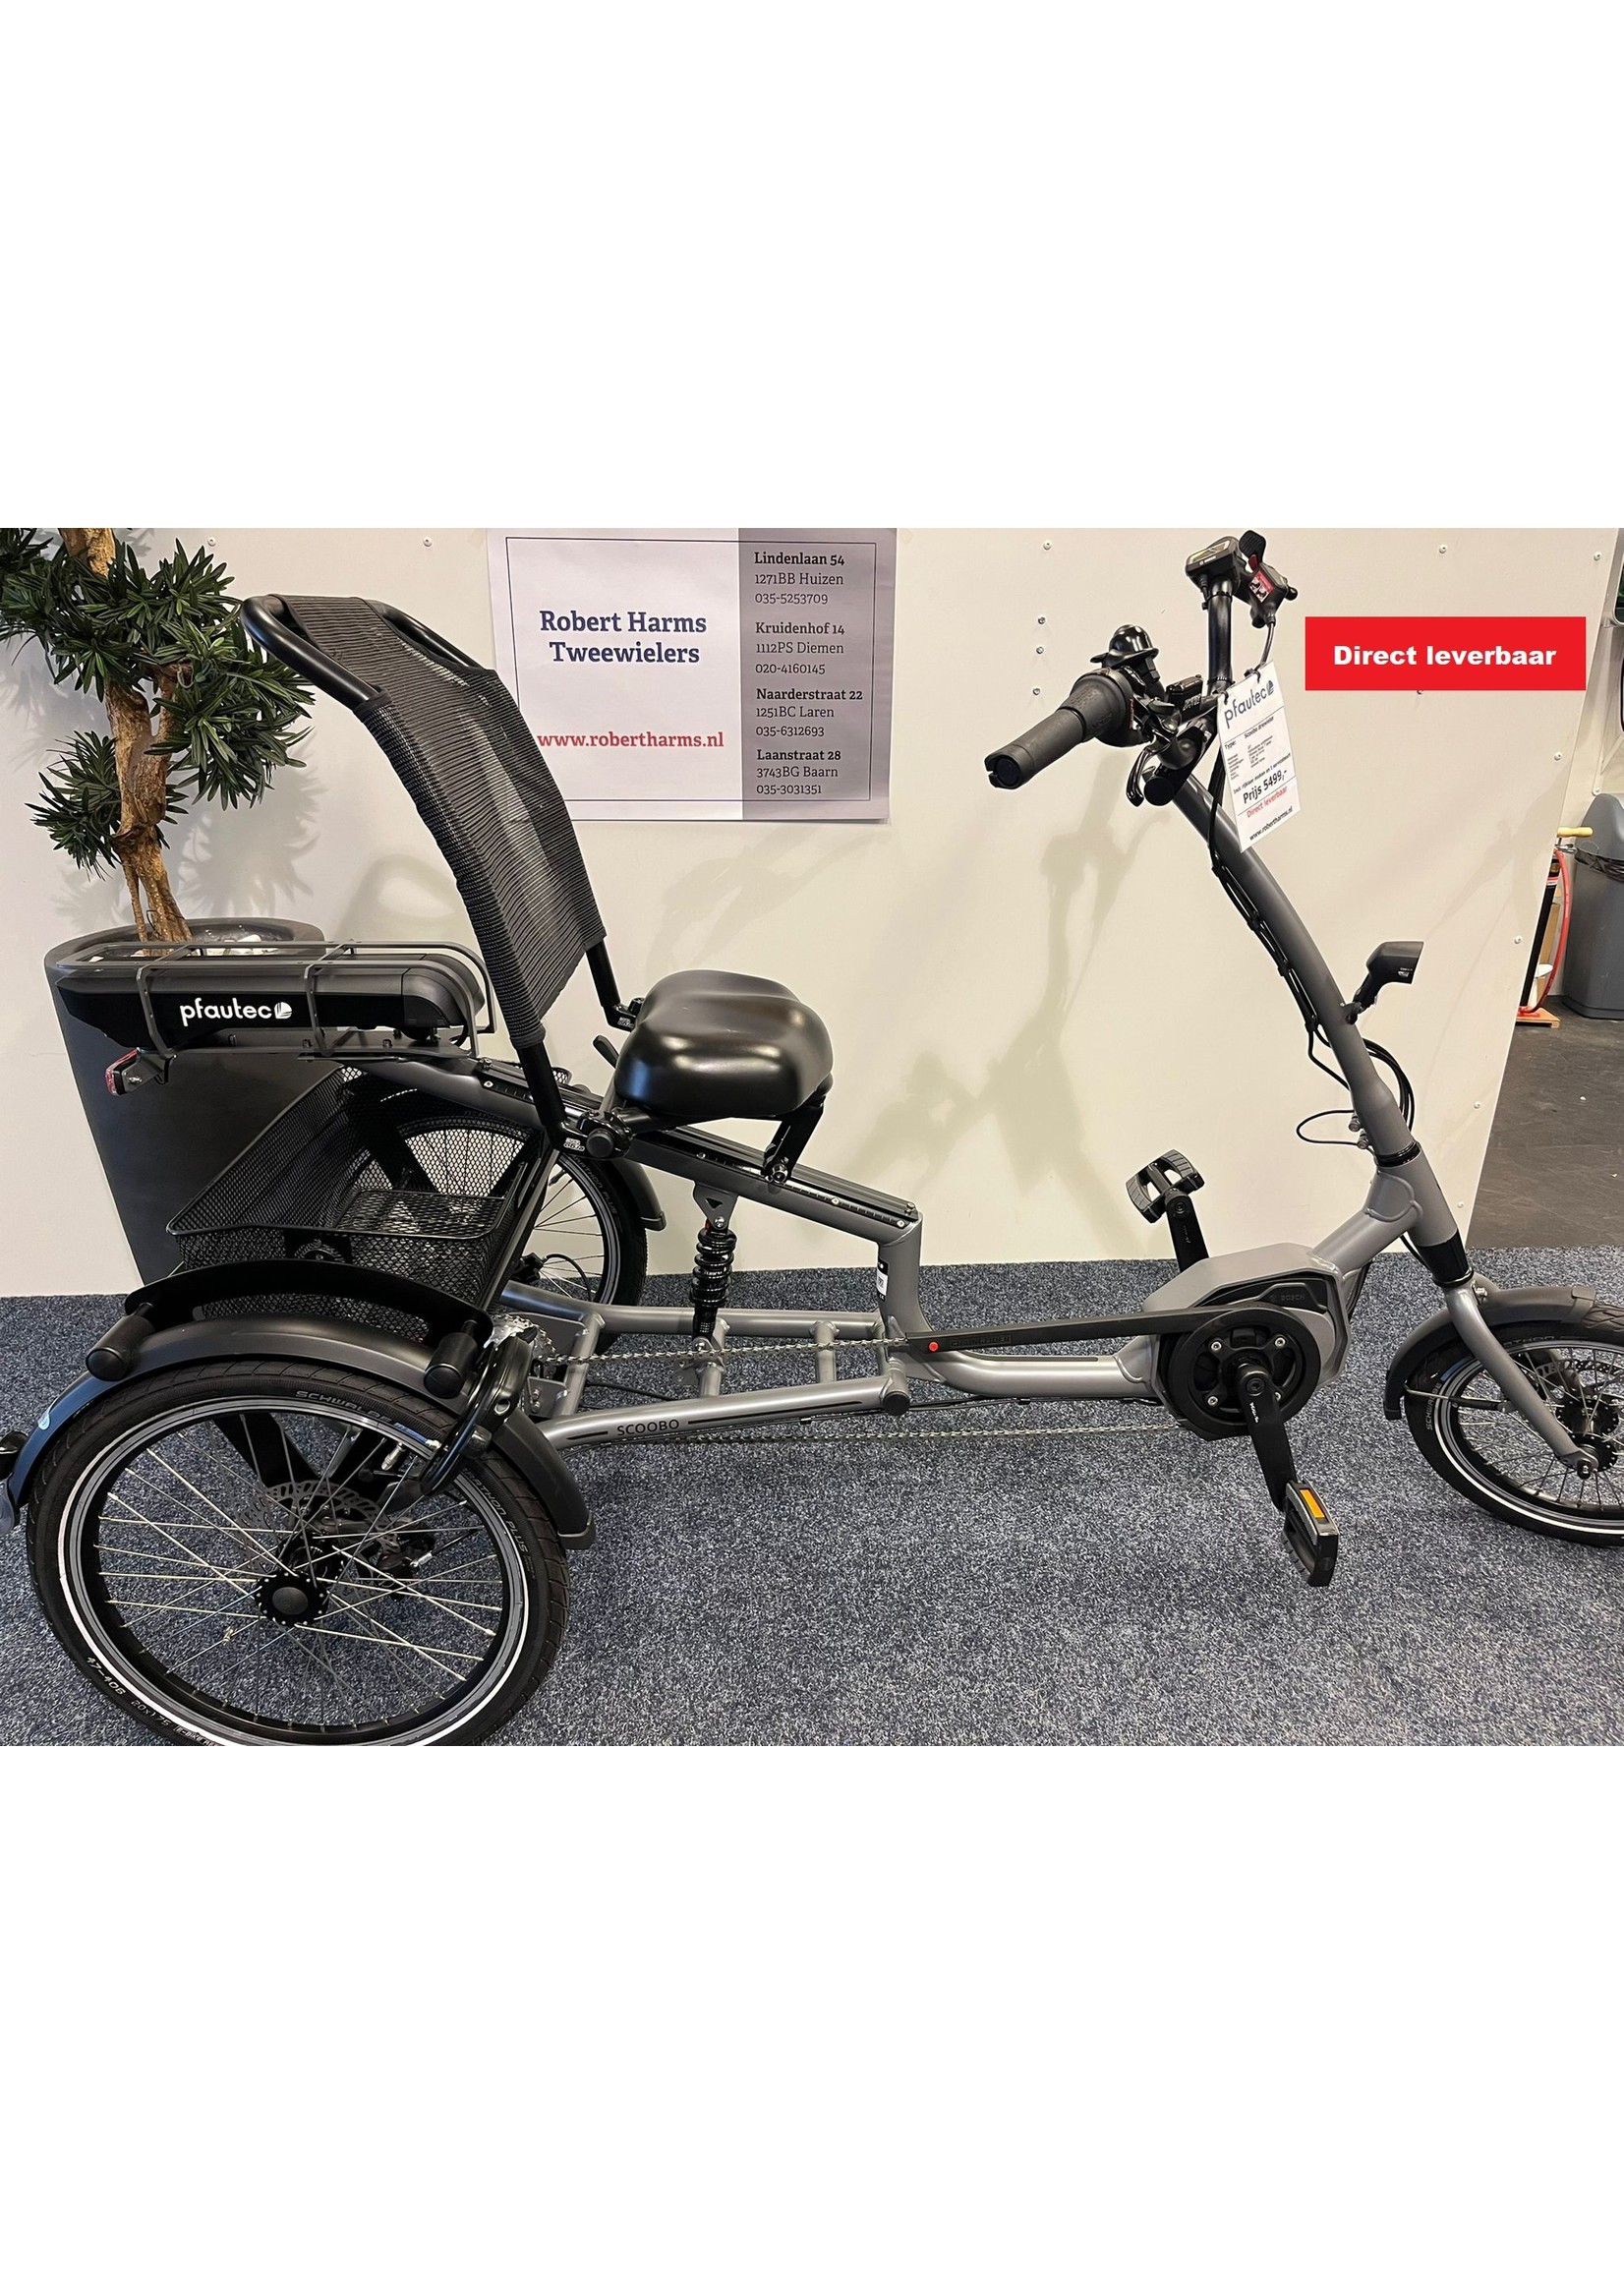 Pfautec - Scoobo Electric Tricycle DIRECTLY AVAILABLE